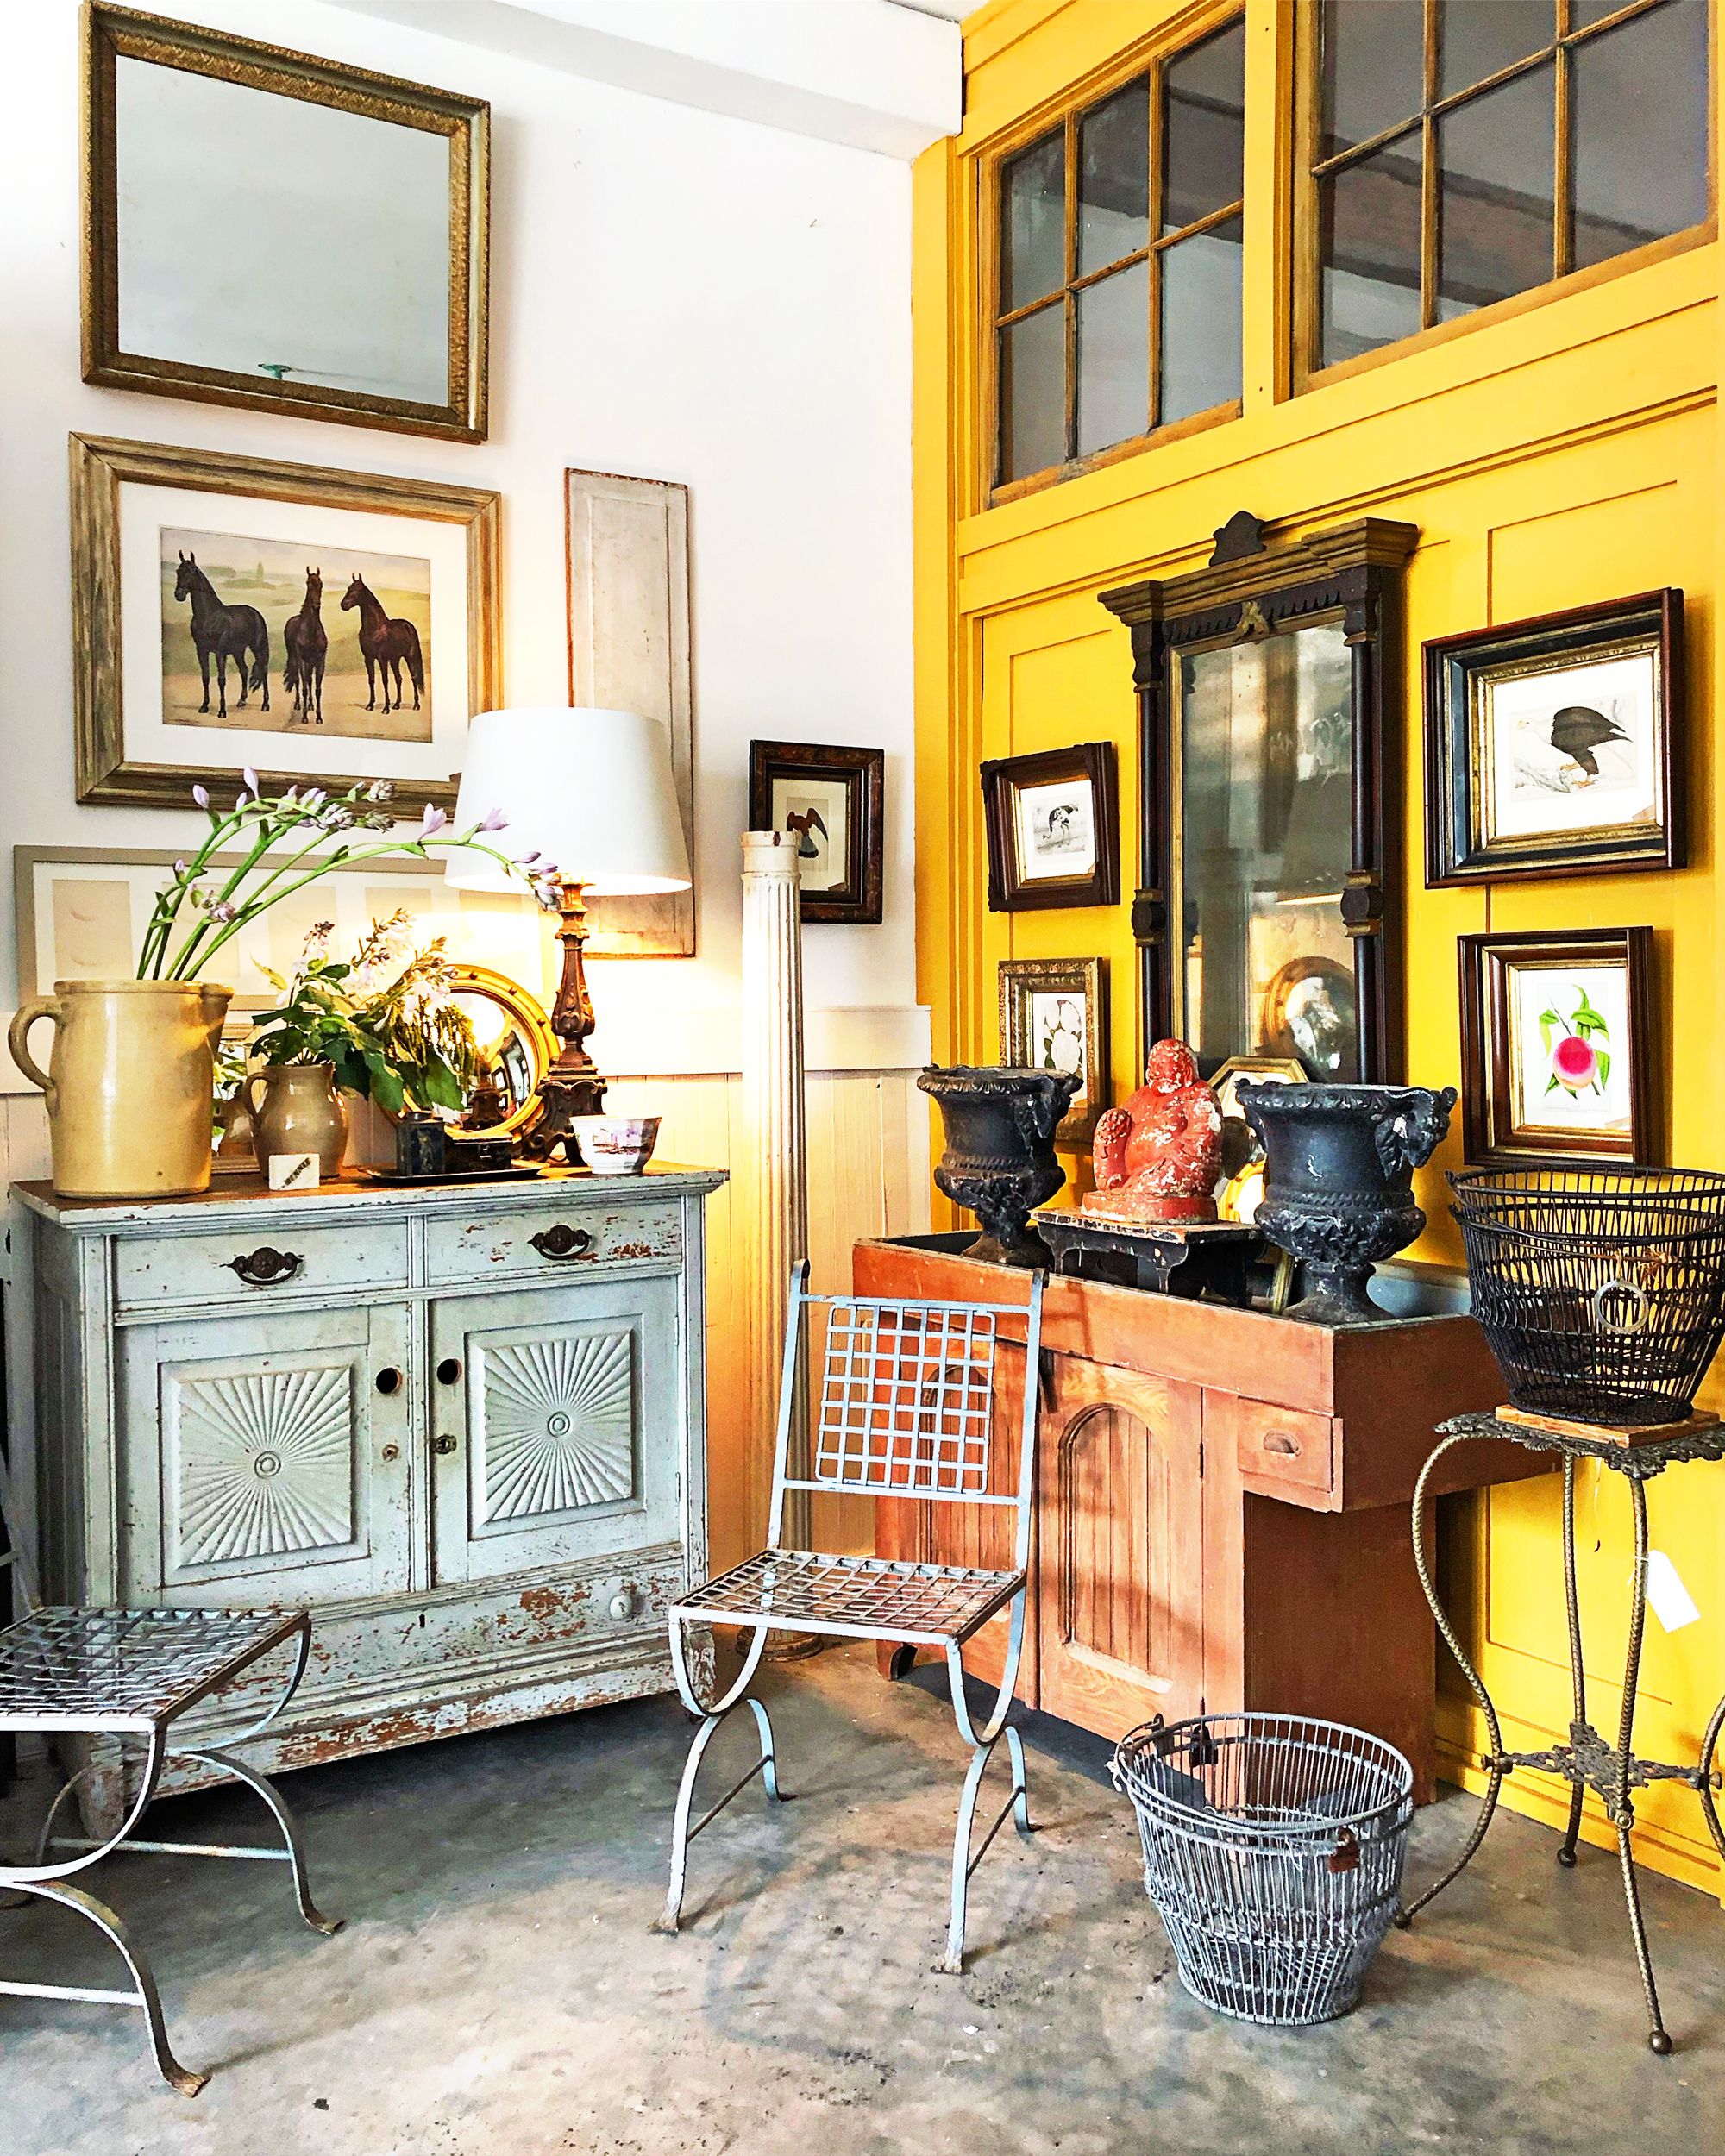 14 Best Shades of Yellow - Top Yellow Paint Colors